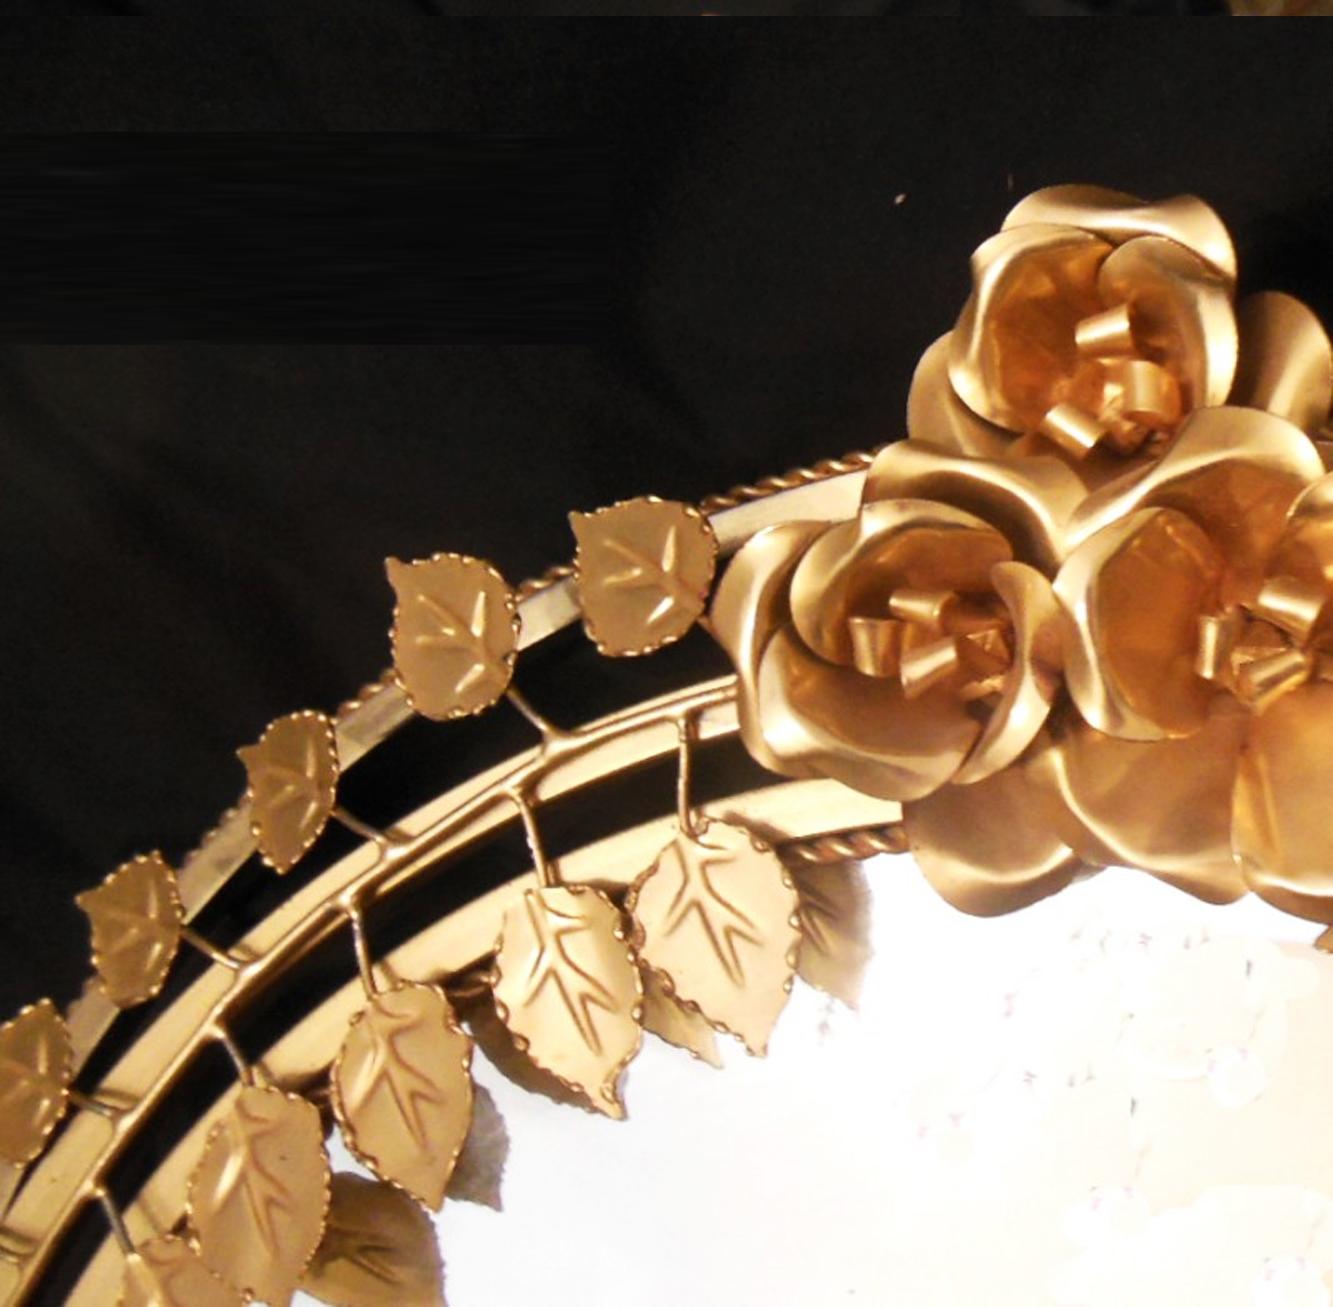 Italian Midcentury Golden Mirror Decorated with Leaves and Roses Spain 1960s